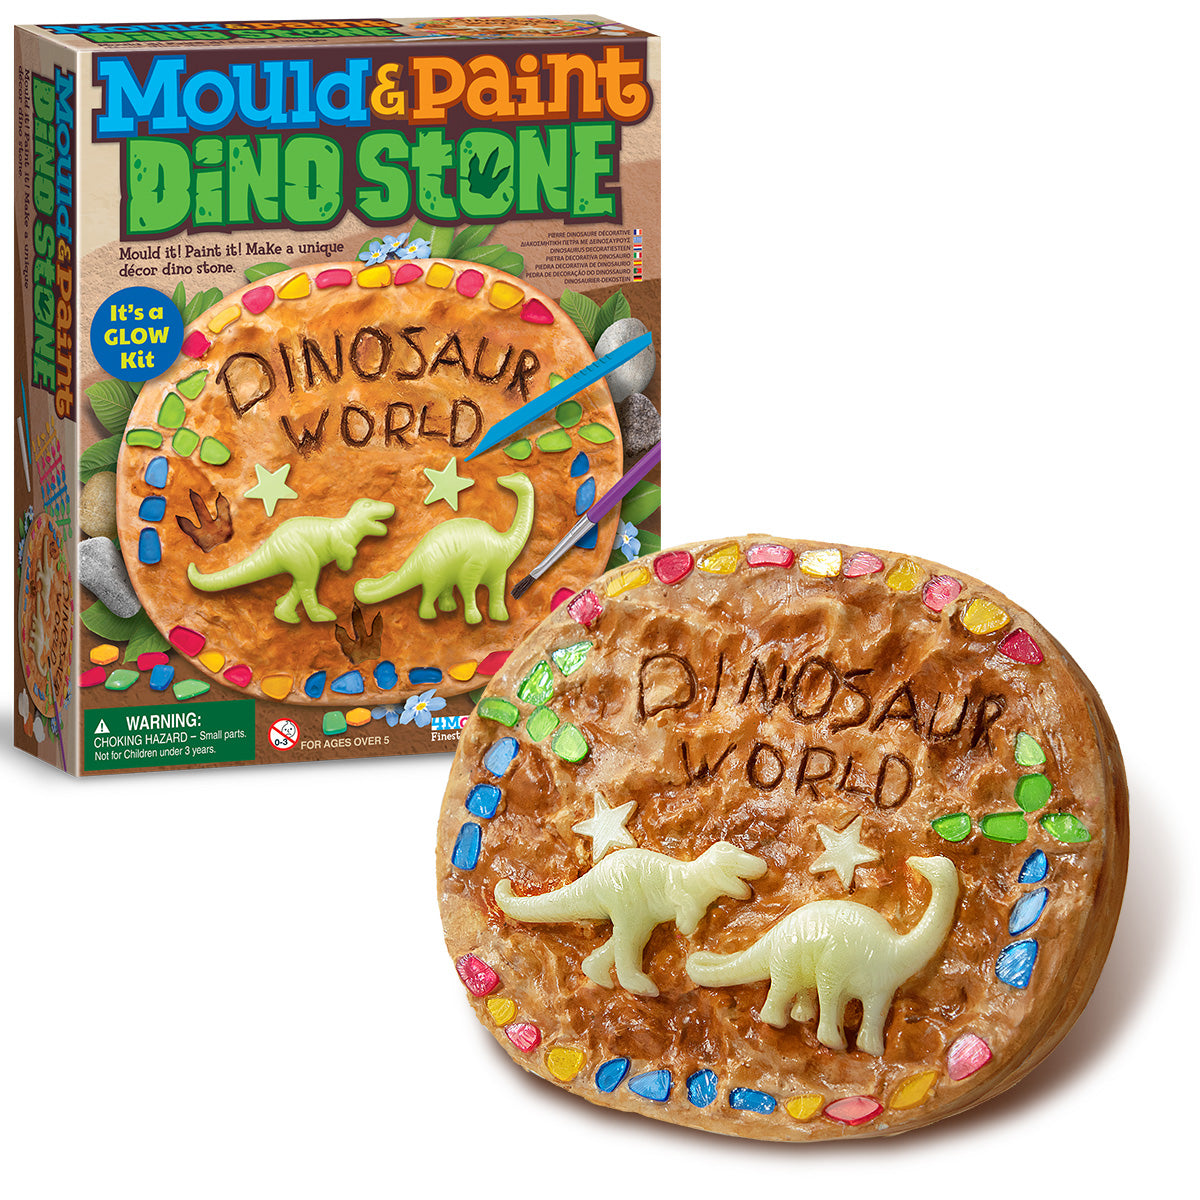 Mould & Paint - Dino Stone